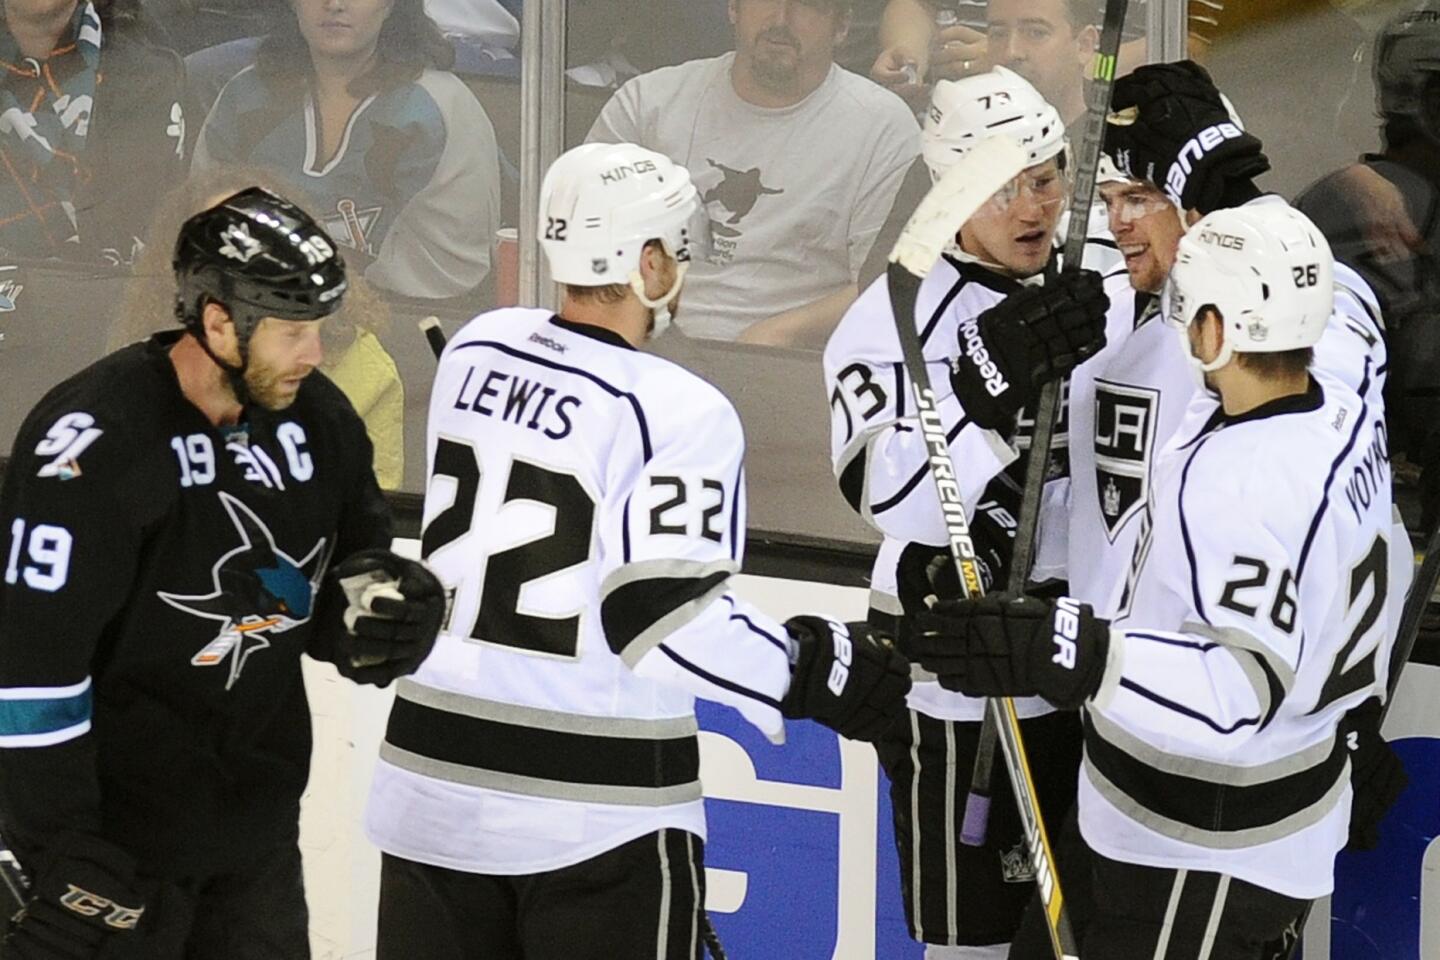 NHL Stadium Series: L.A. Kings take bite out of Sharks in great